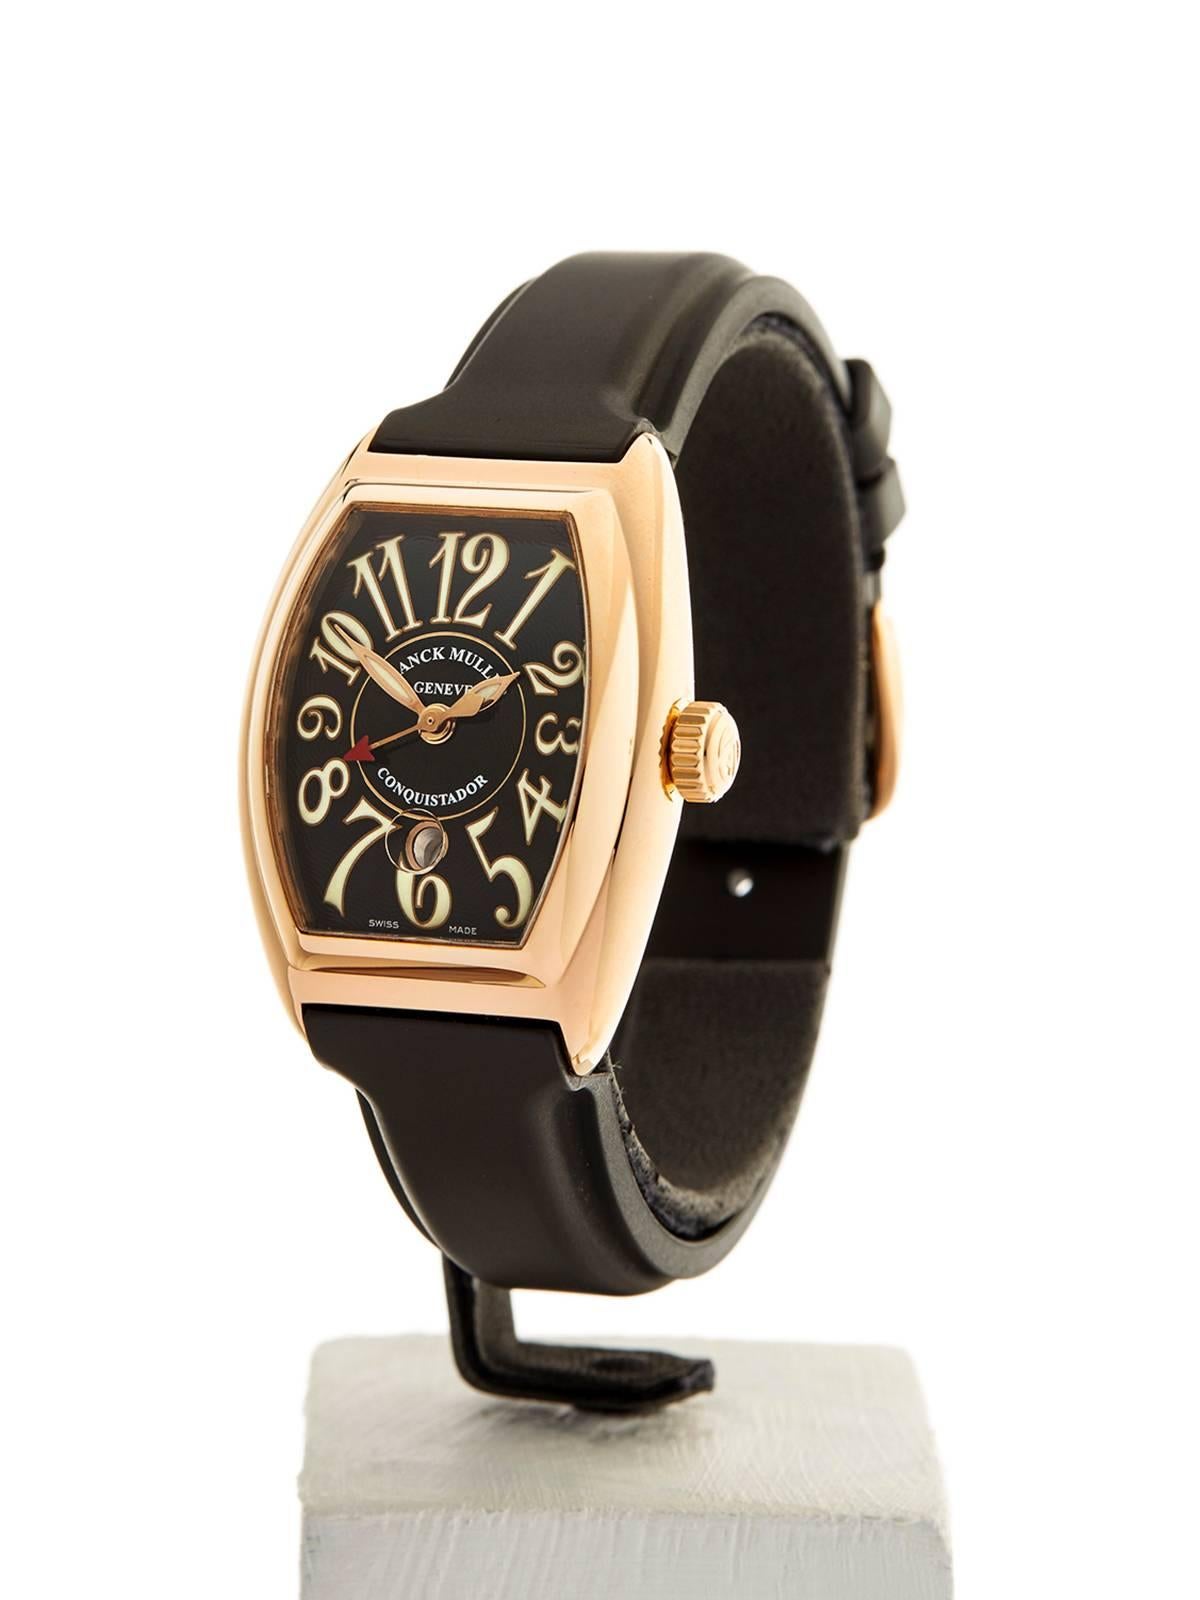 Ref: W3693
Model: 8005LSC
Serial: 236
Condition: 9 - Excellent condition
Age:	6th July 2004
Case Diameter: 27 mm
Case Size: 27mm by 38mm
Box and Papers:  Box, Manuals and Guarantee
Movement: Automatic
Case: 18k Rose Gold
Dial: Black Arabic
Bracelet: